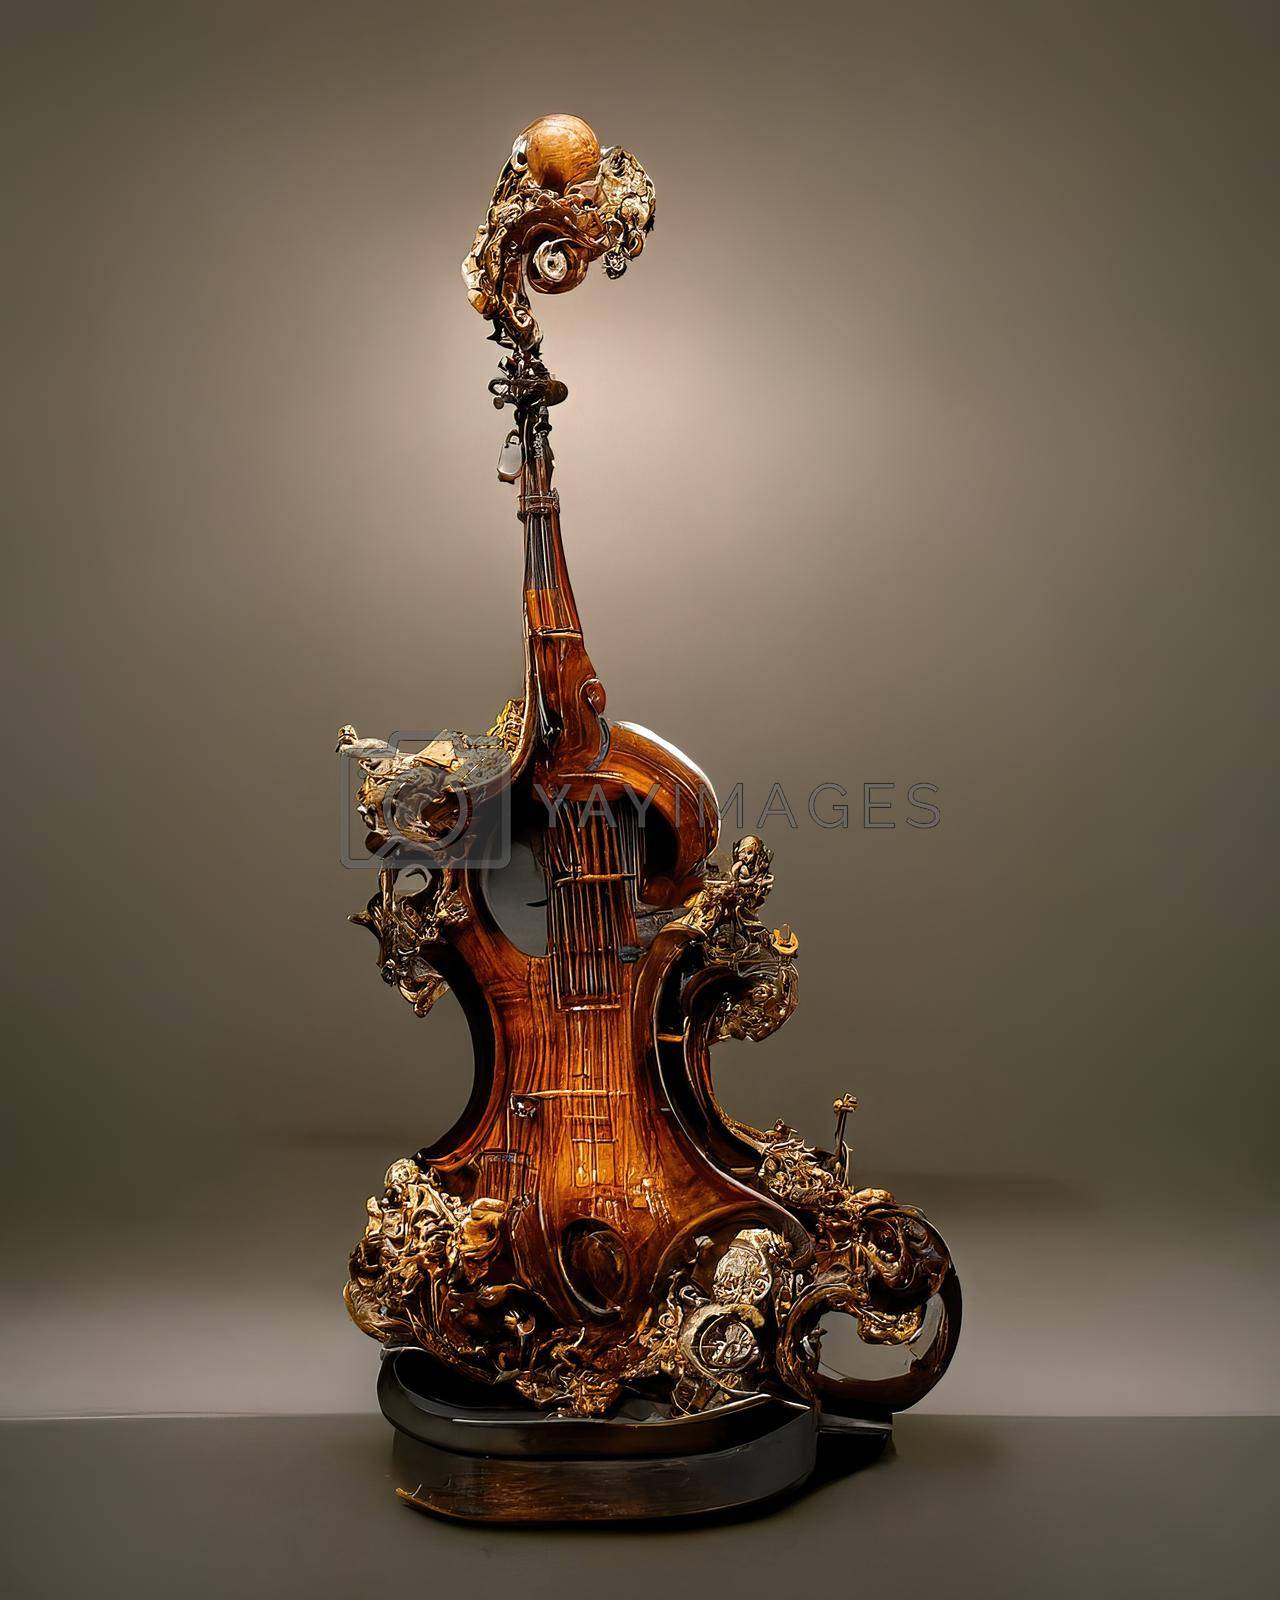 Royalty free image of Picture of baroque violin statue, 3D illustration by Farcas